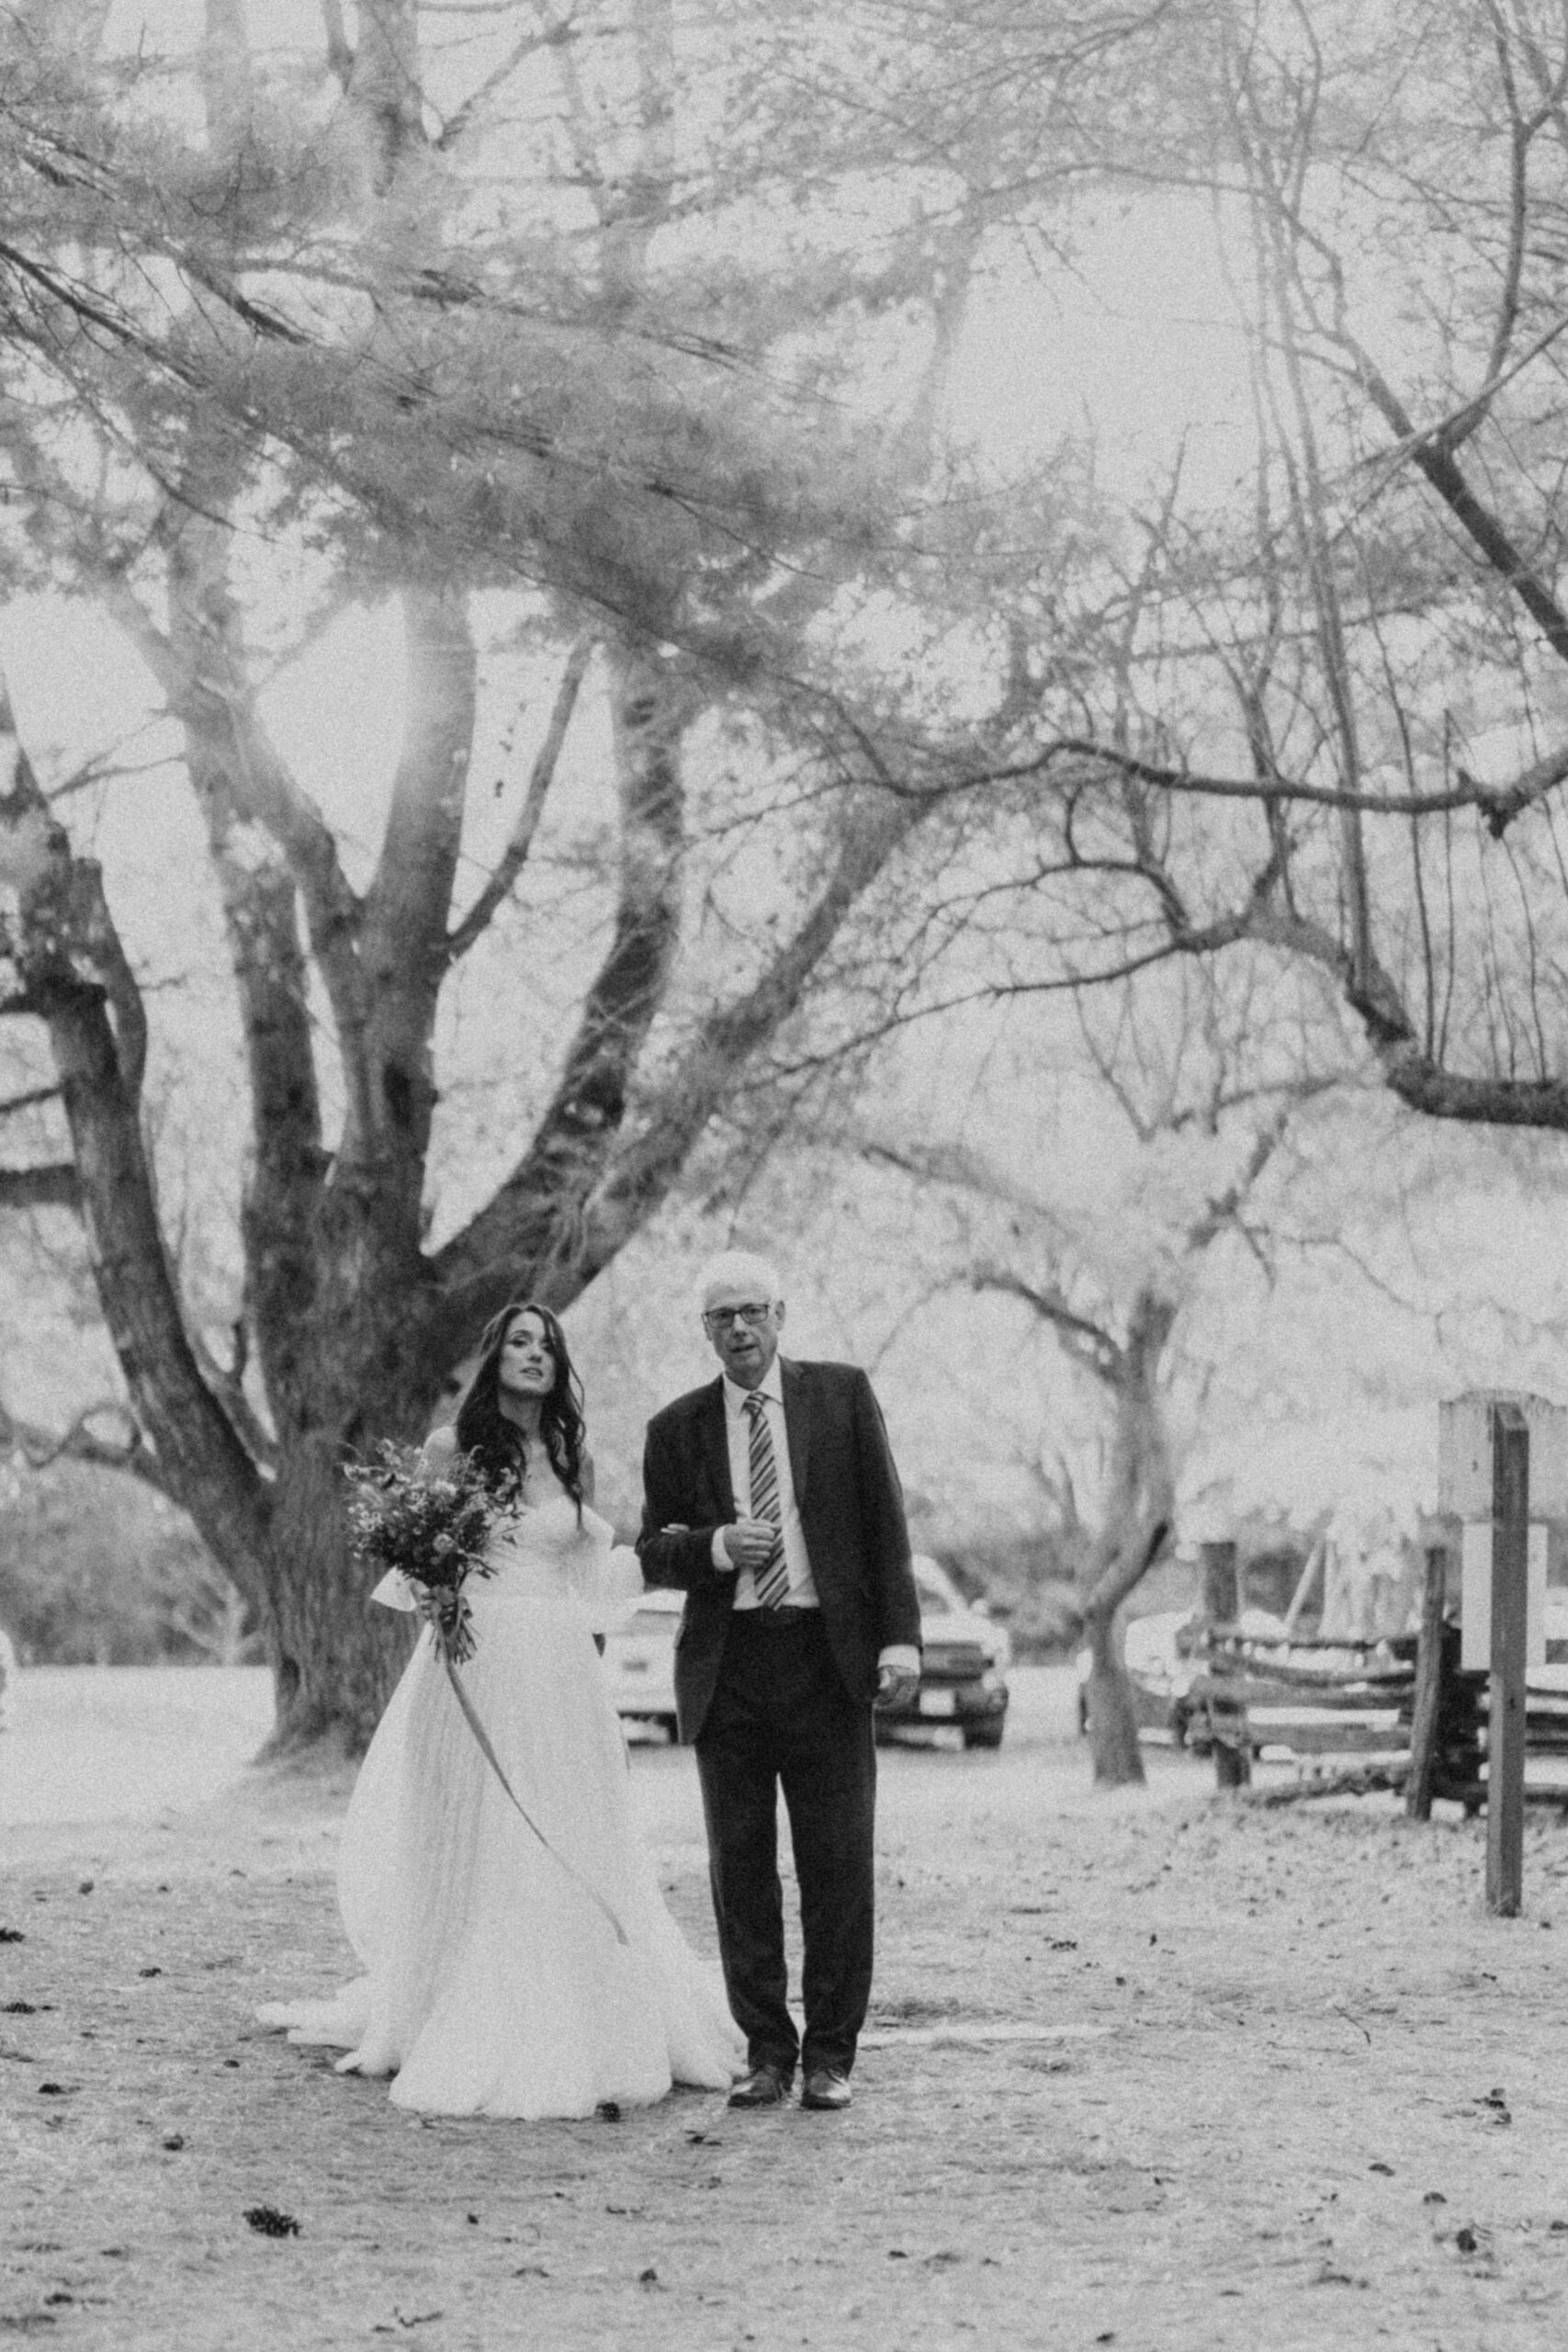 father walking bride down the aisle for an outdoor ceremony in the woods